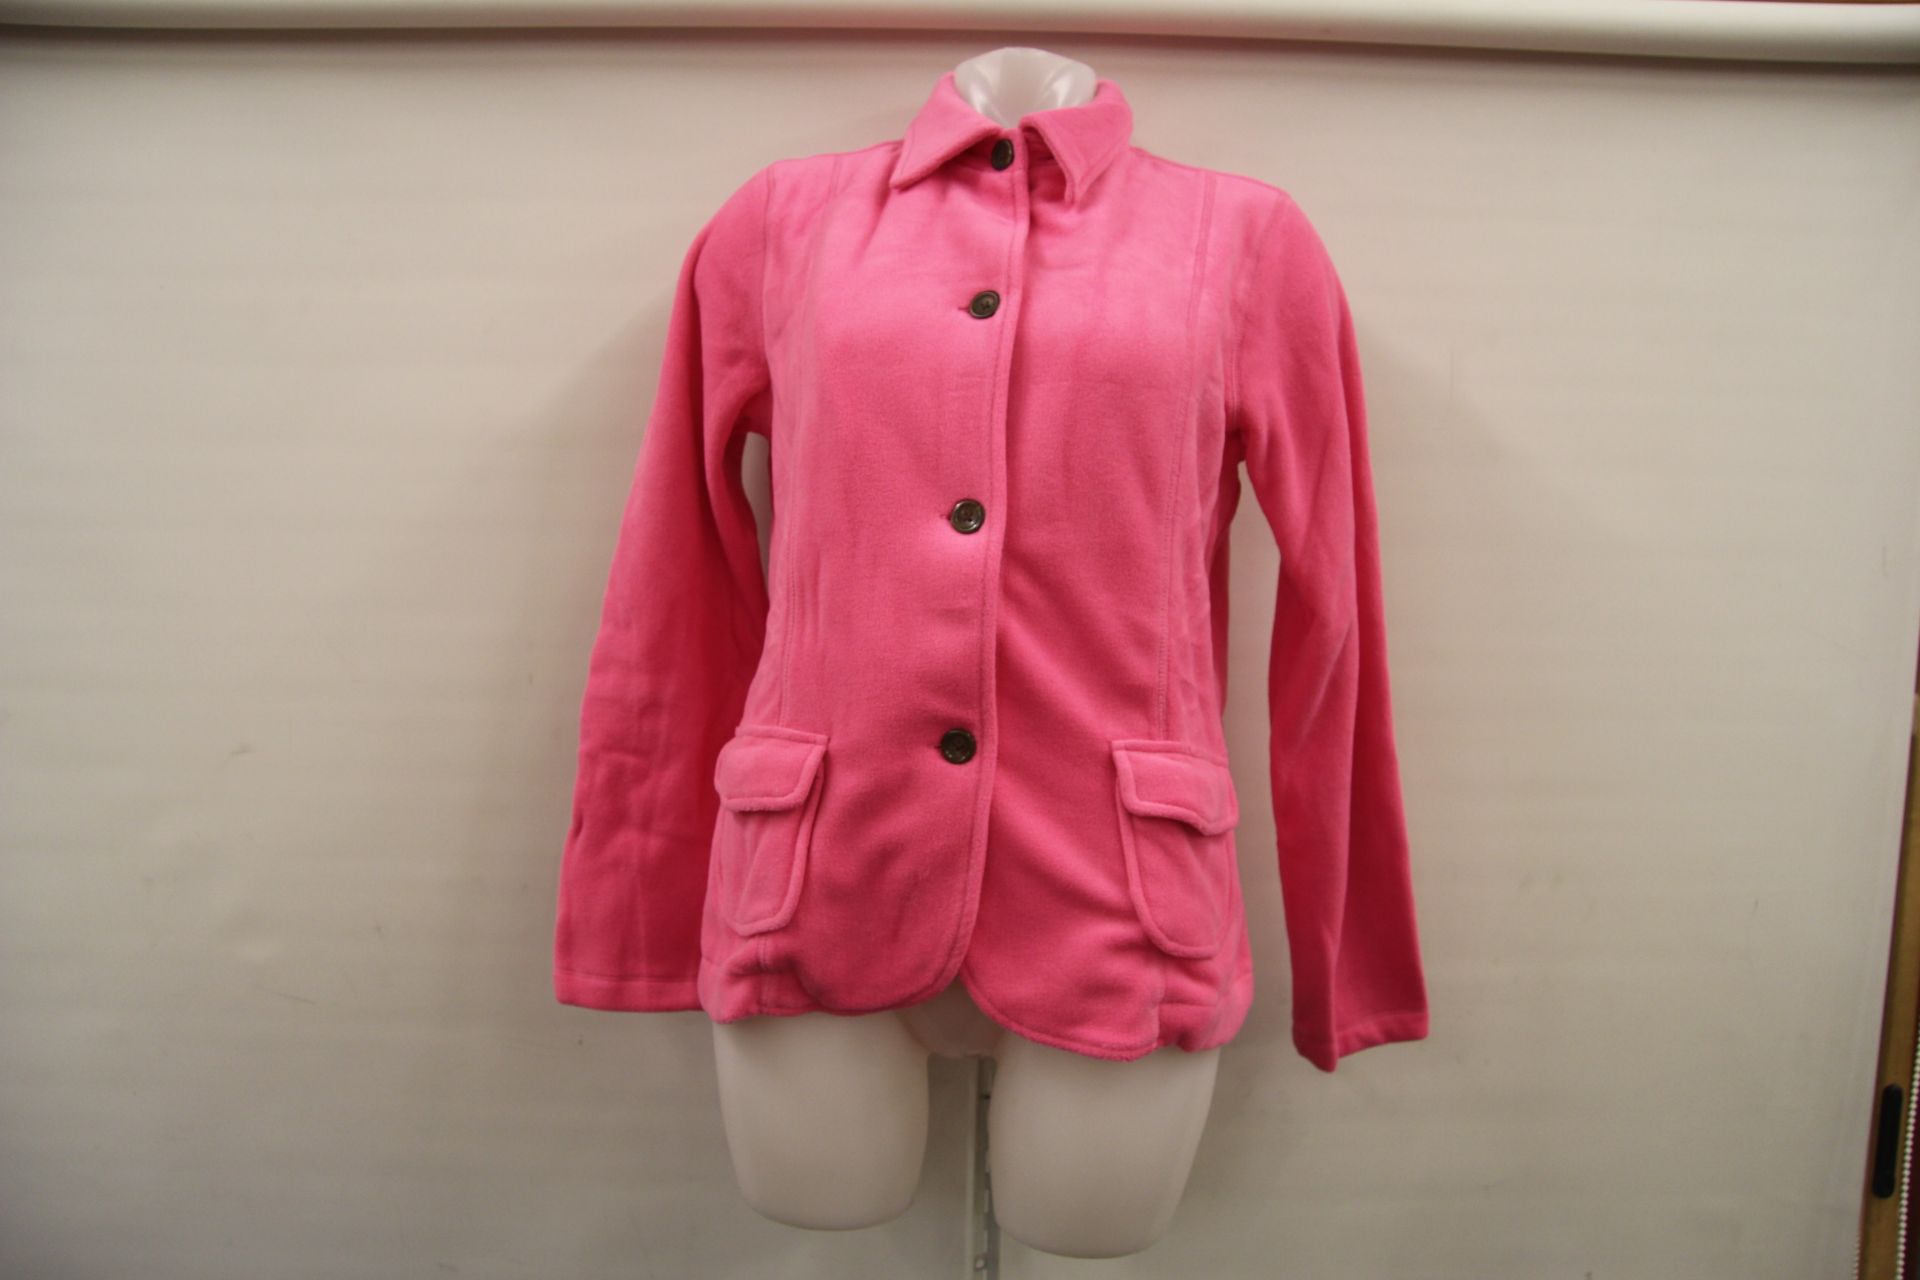 V Brand New Ladies Lands End Pink Fleece Jacket Size M RRP £39.99 X 2 YOUR BID PRICE TO BE